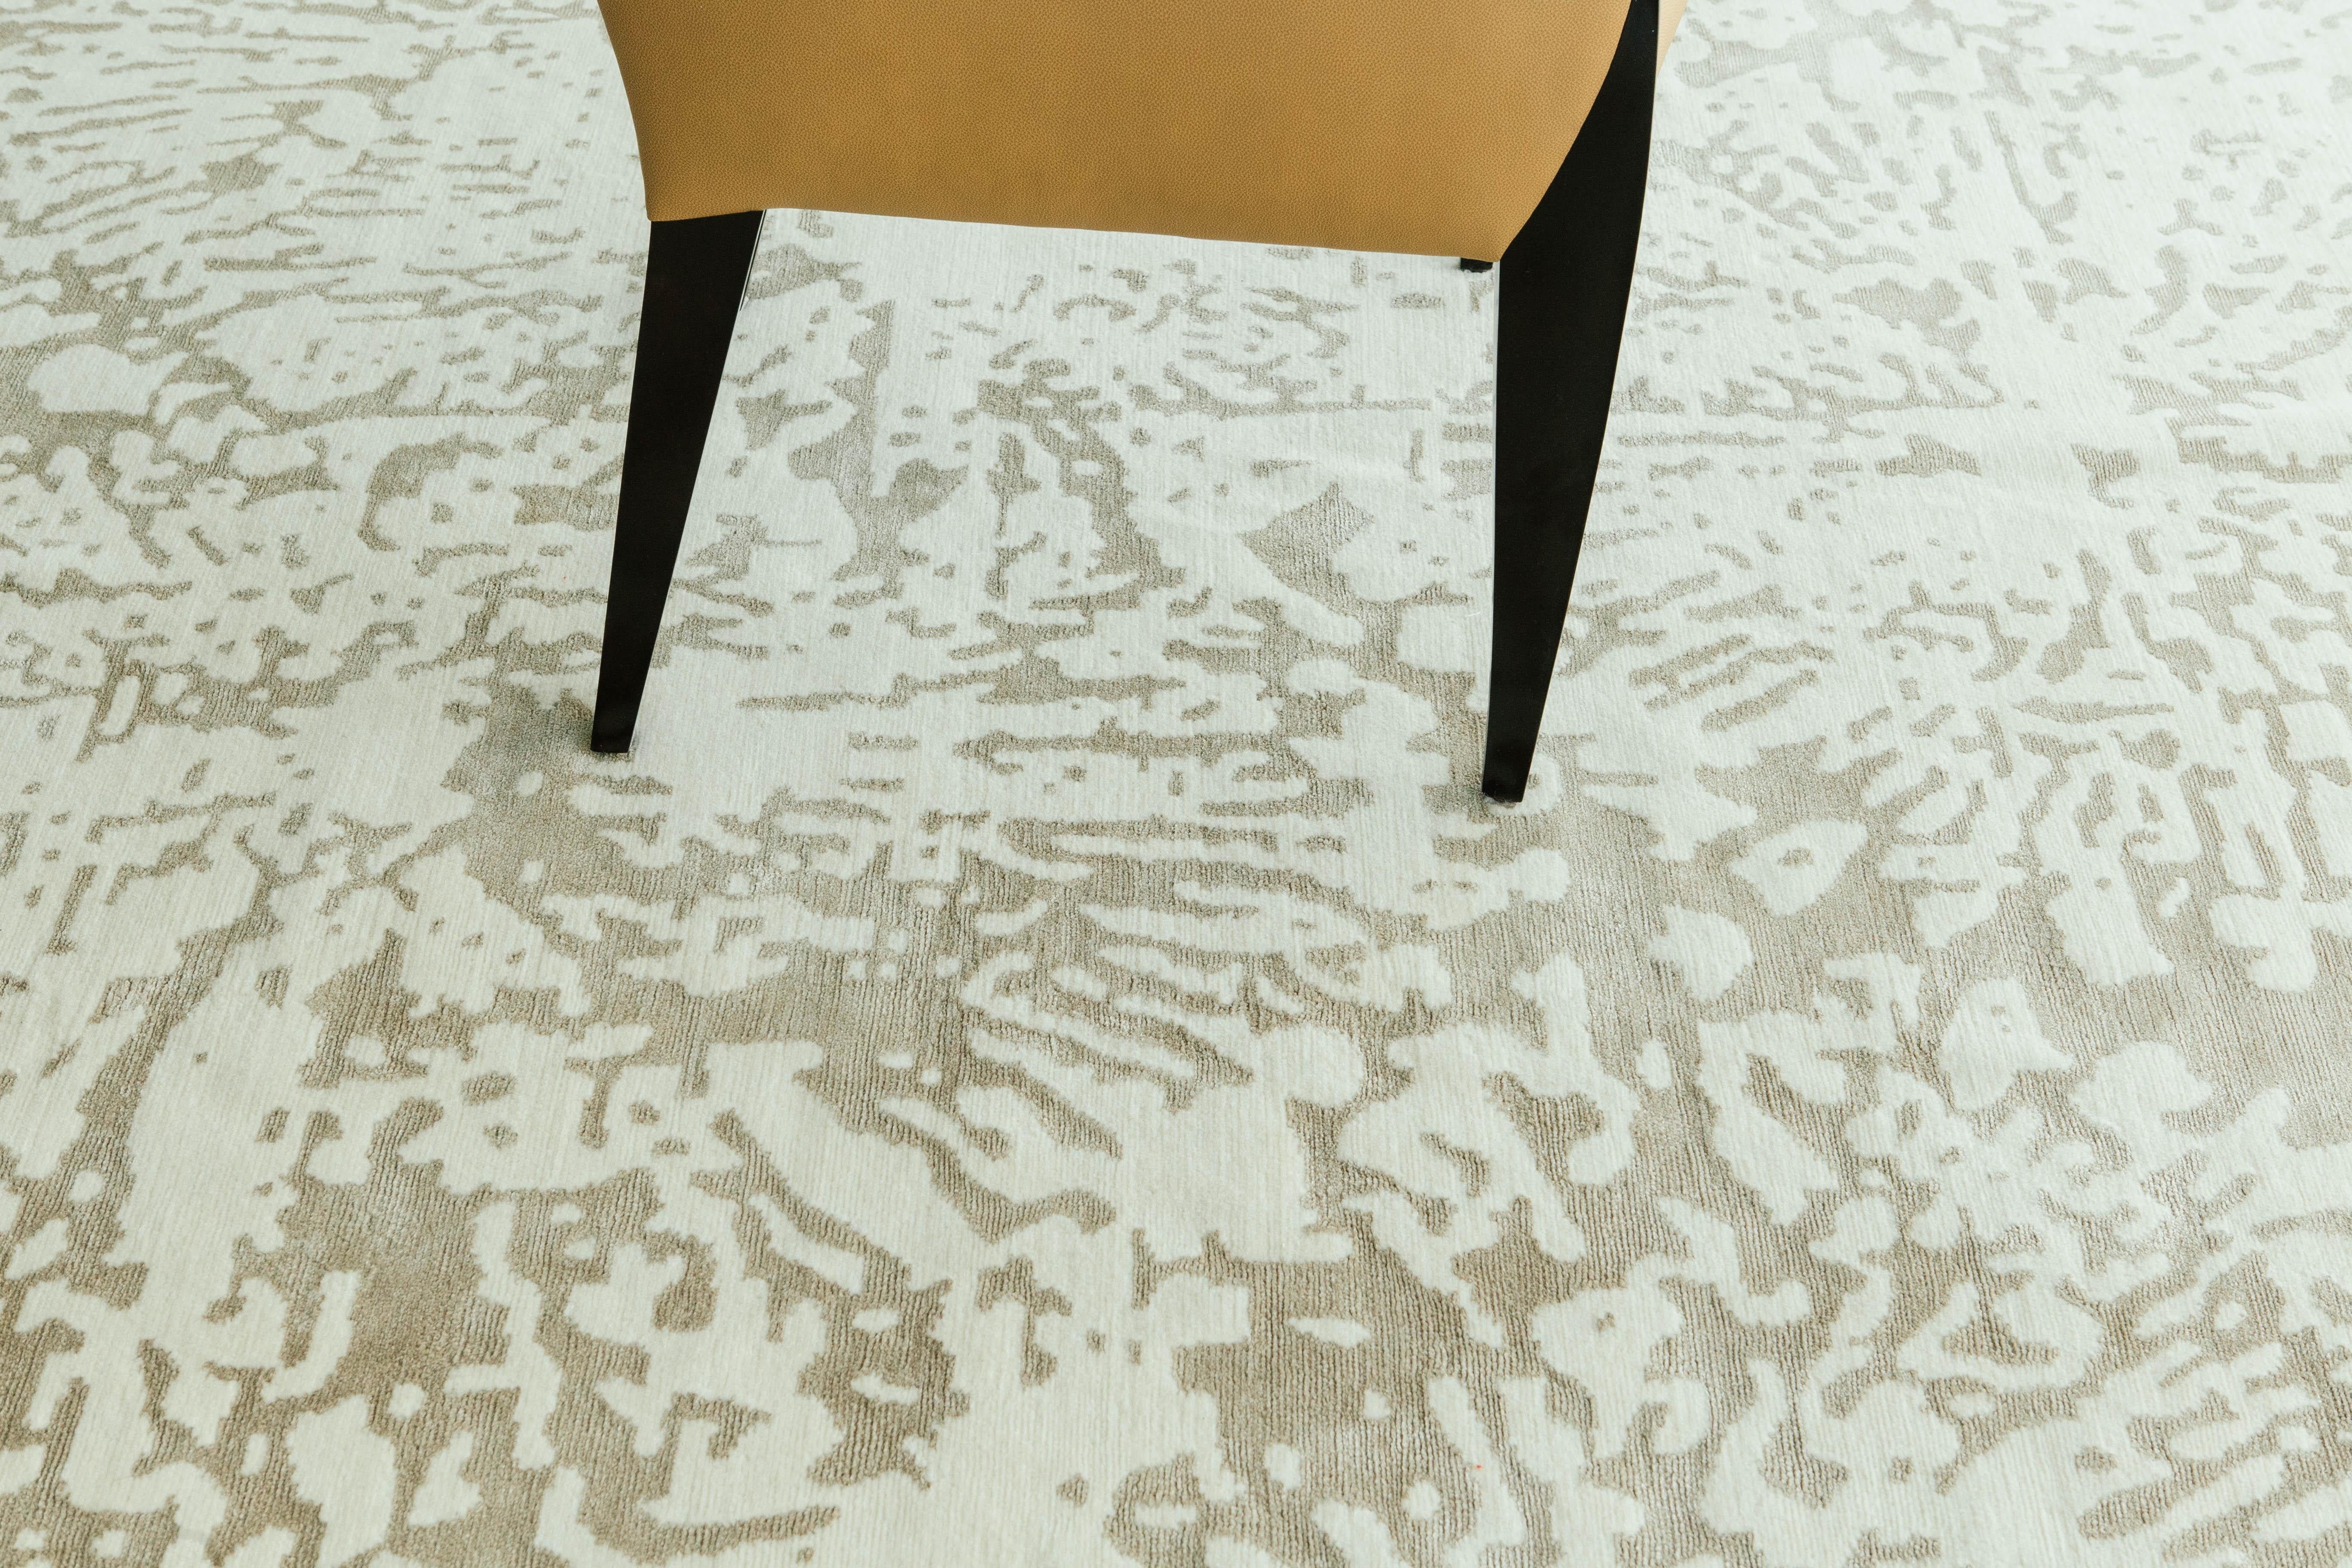 'Festa' is designed to be nothing short of festive. Its simple yet exciting design makes the perfect statement for any design space. This wool and silk design in tan and ivory will bring the perfect decorative touch.


Rug number: 21661
Size: 9'